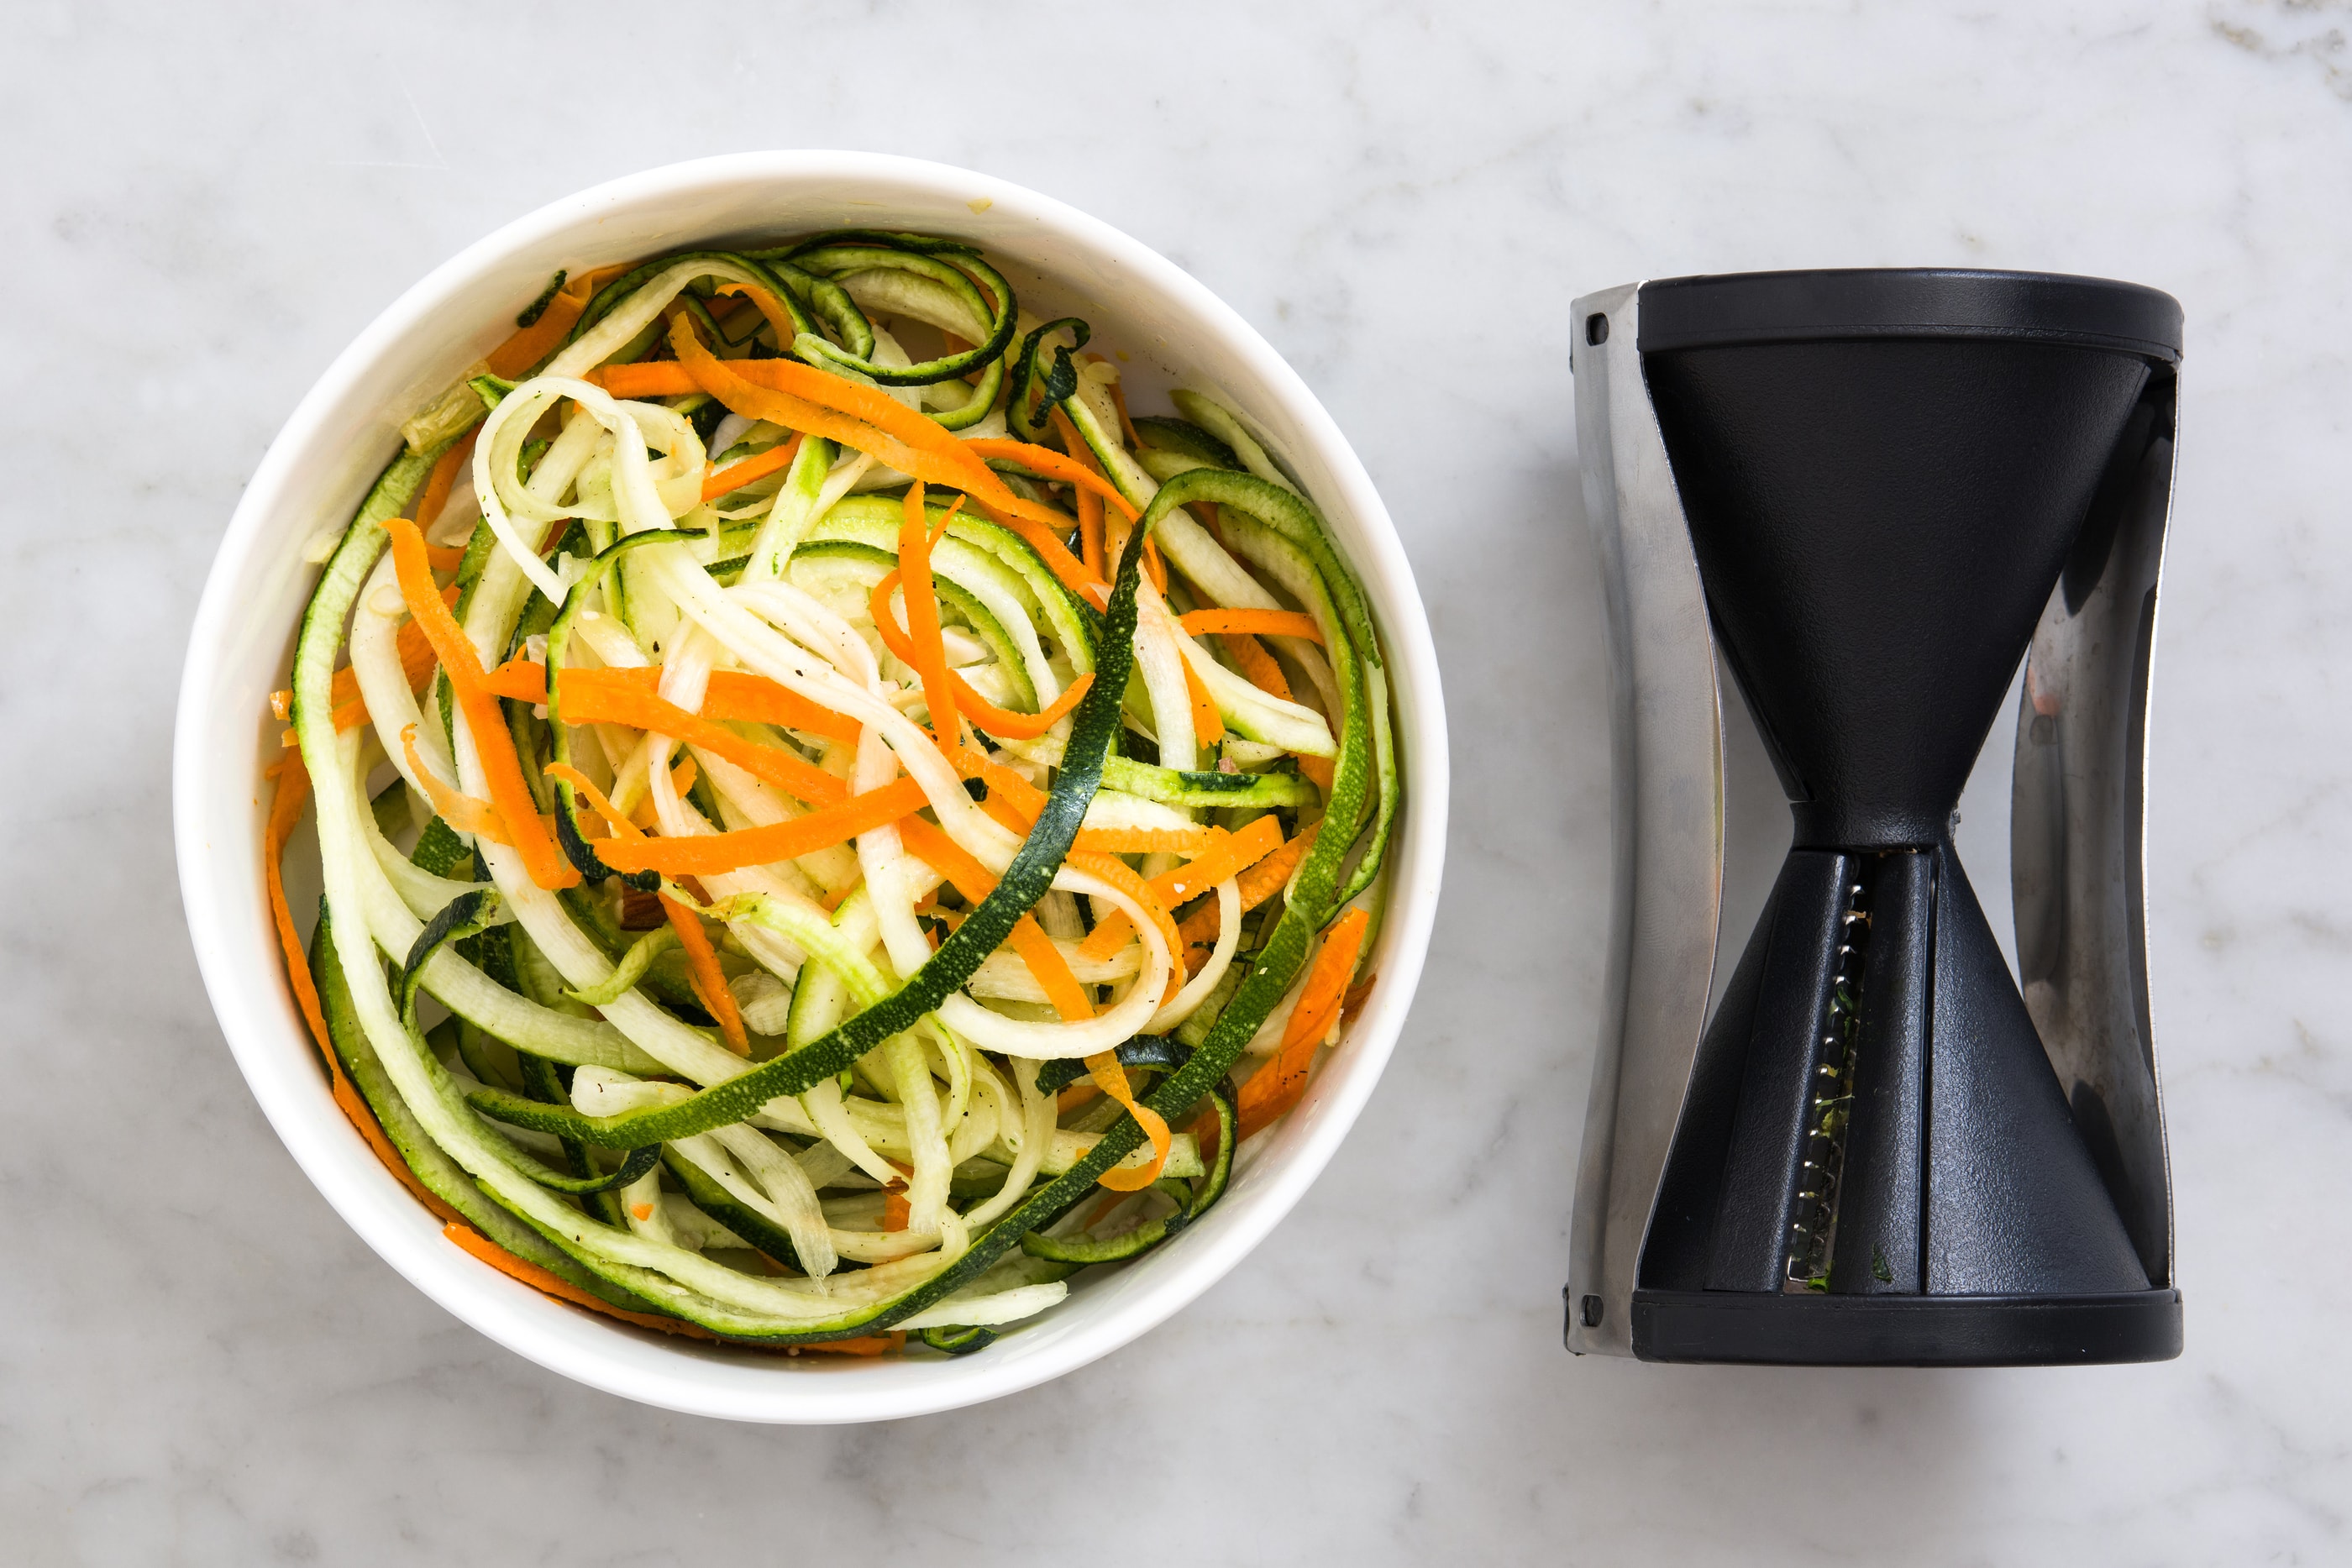 11 Vegetables You Can Spiralize (+ Recipes!)